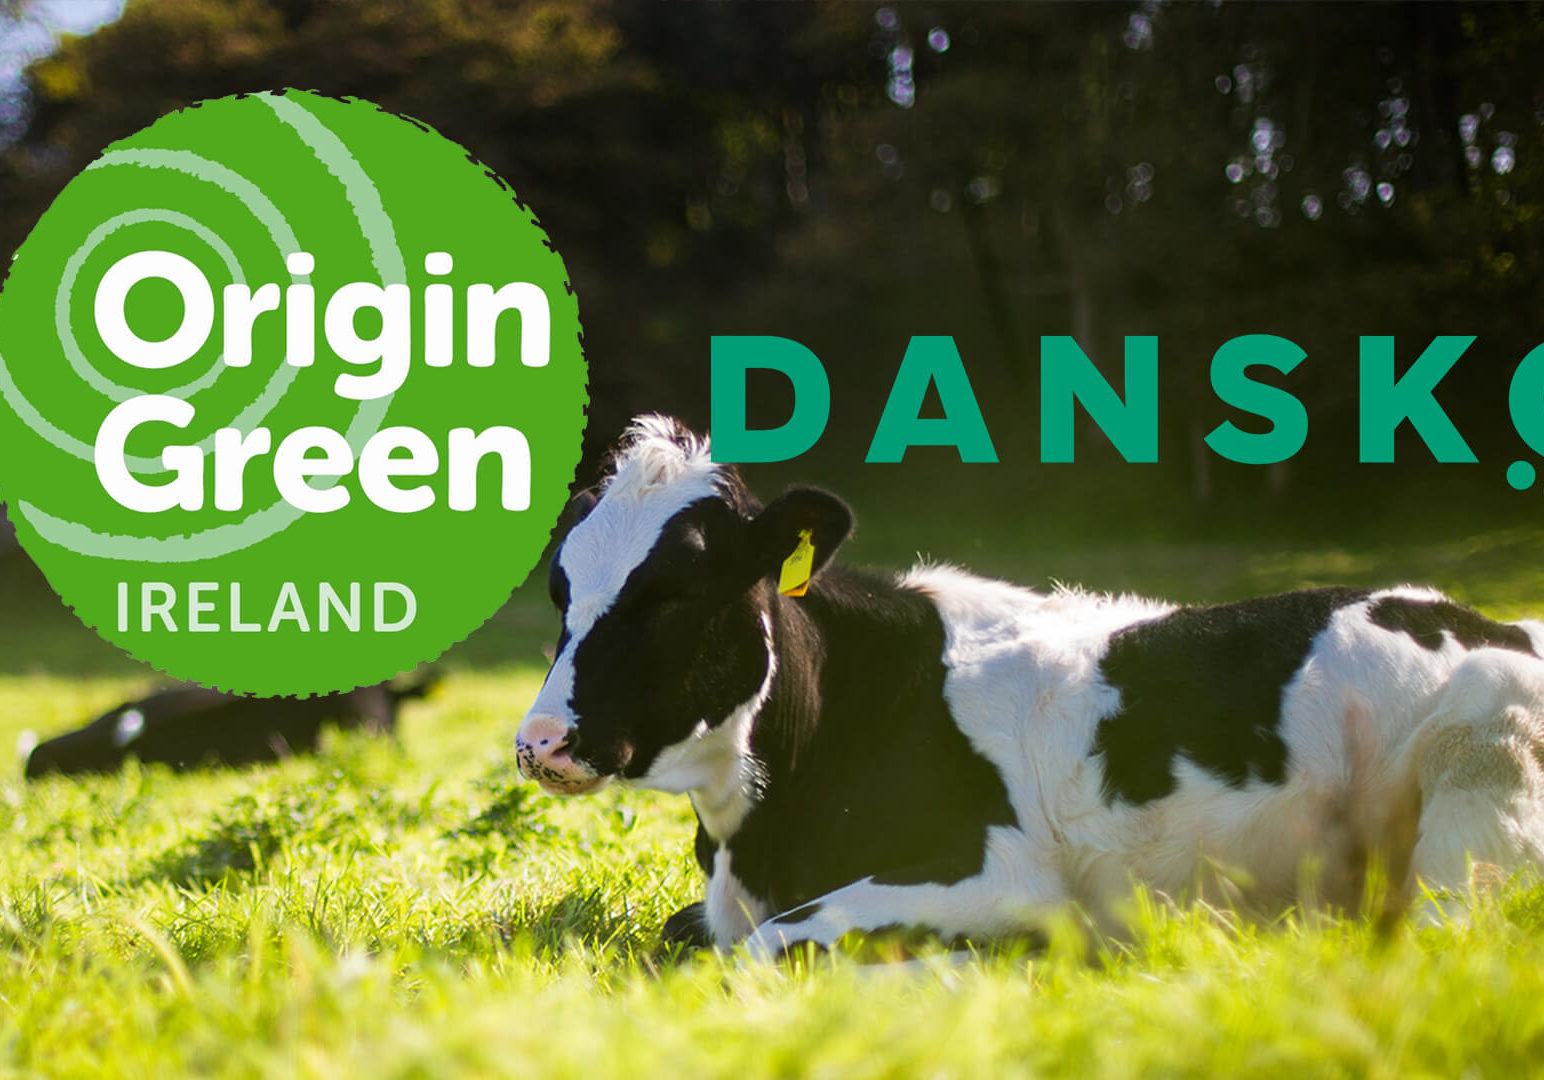 Dansko Foods works to A Sustainable Future With Origin Green